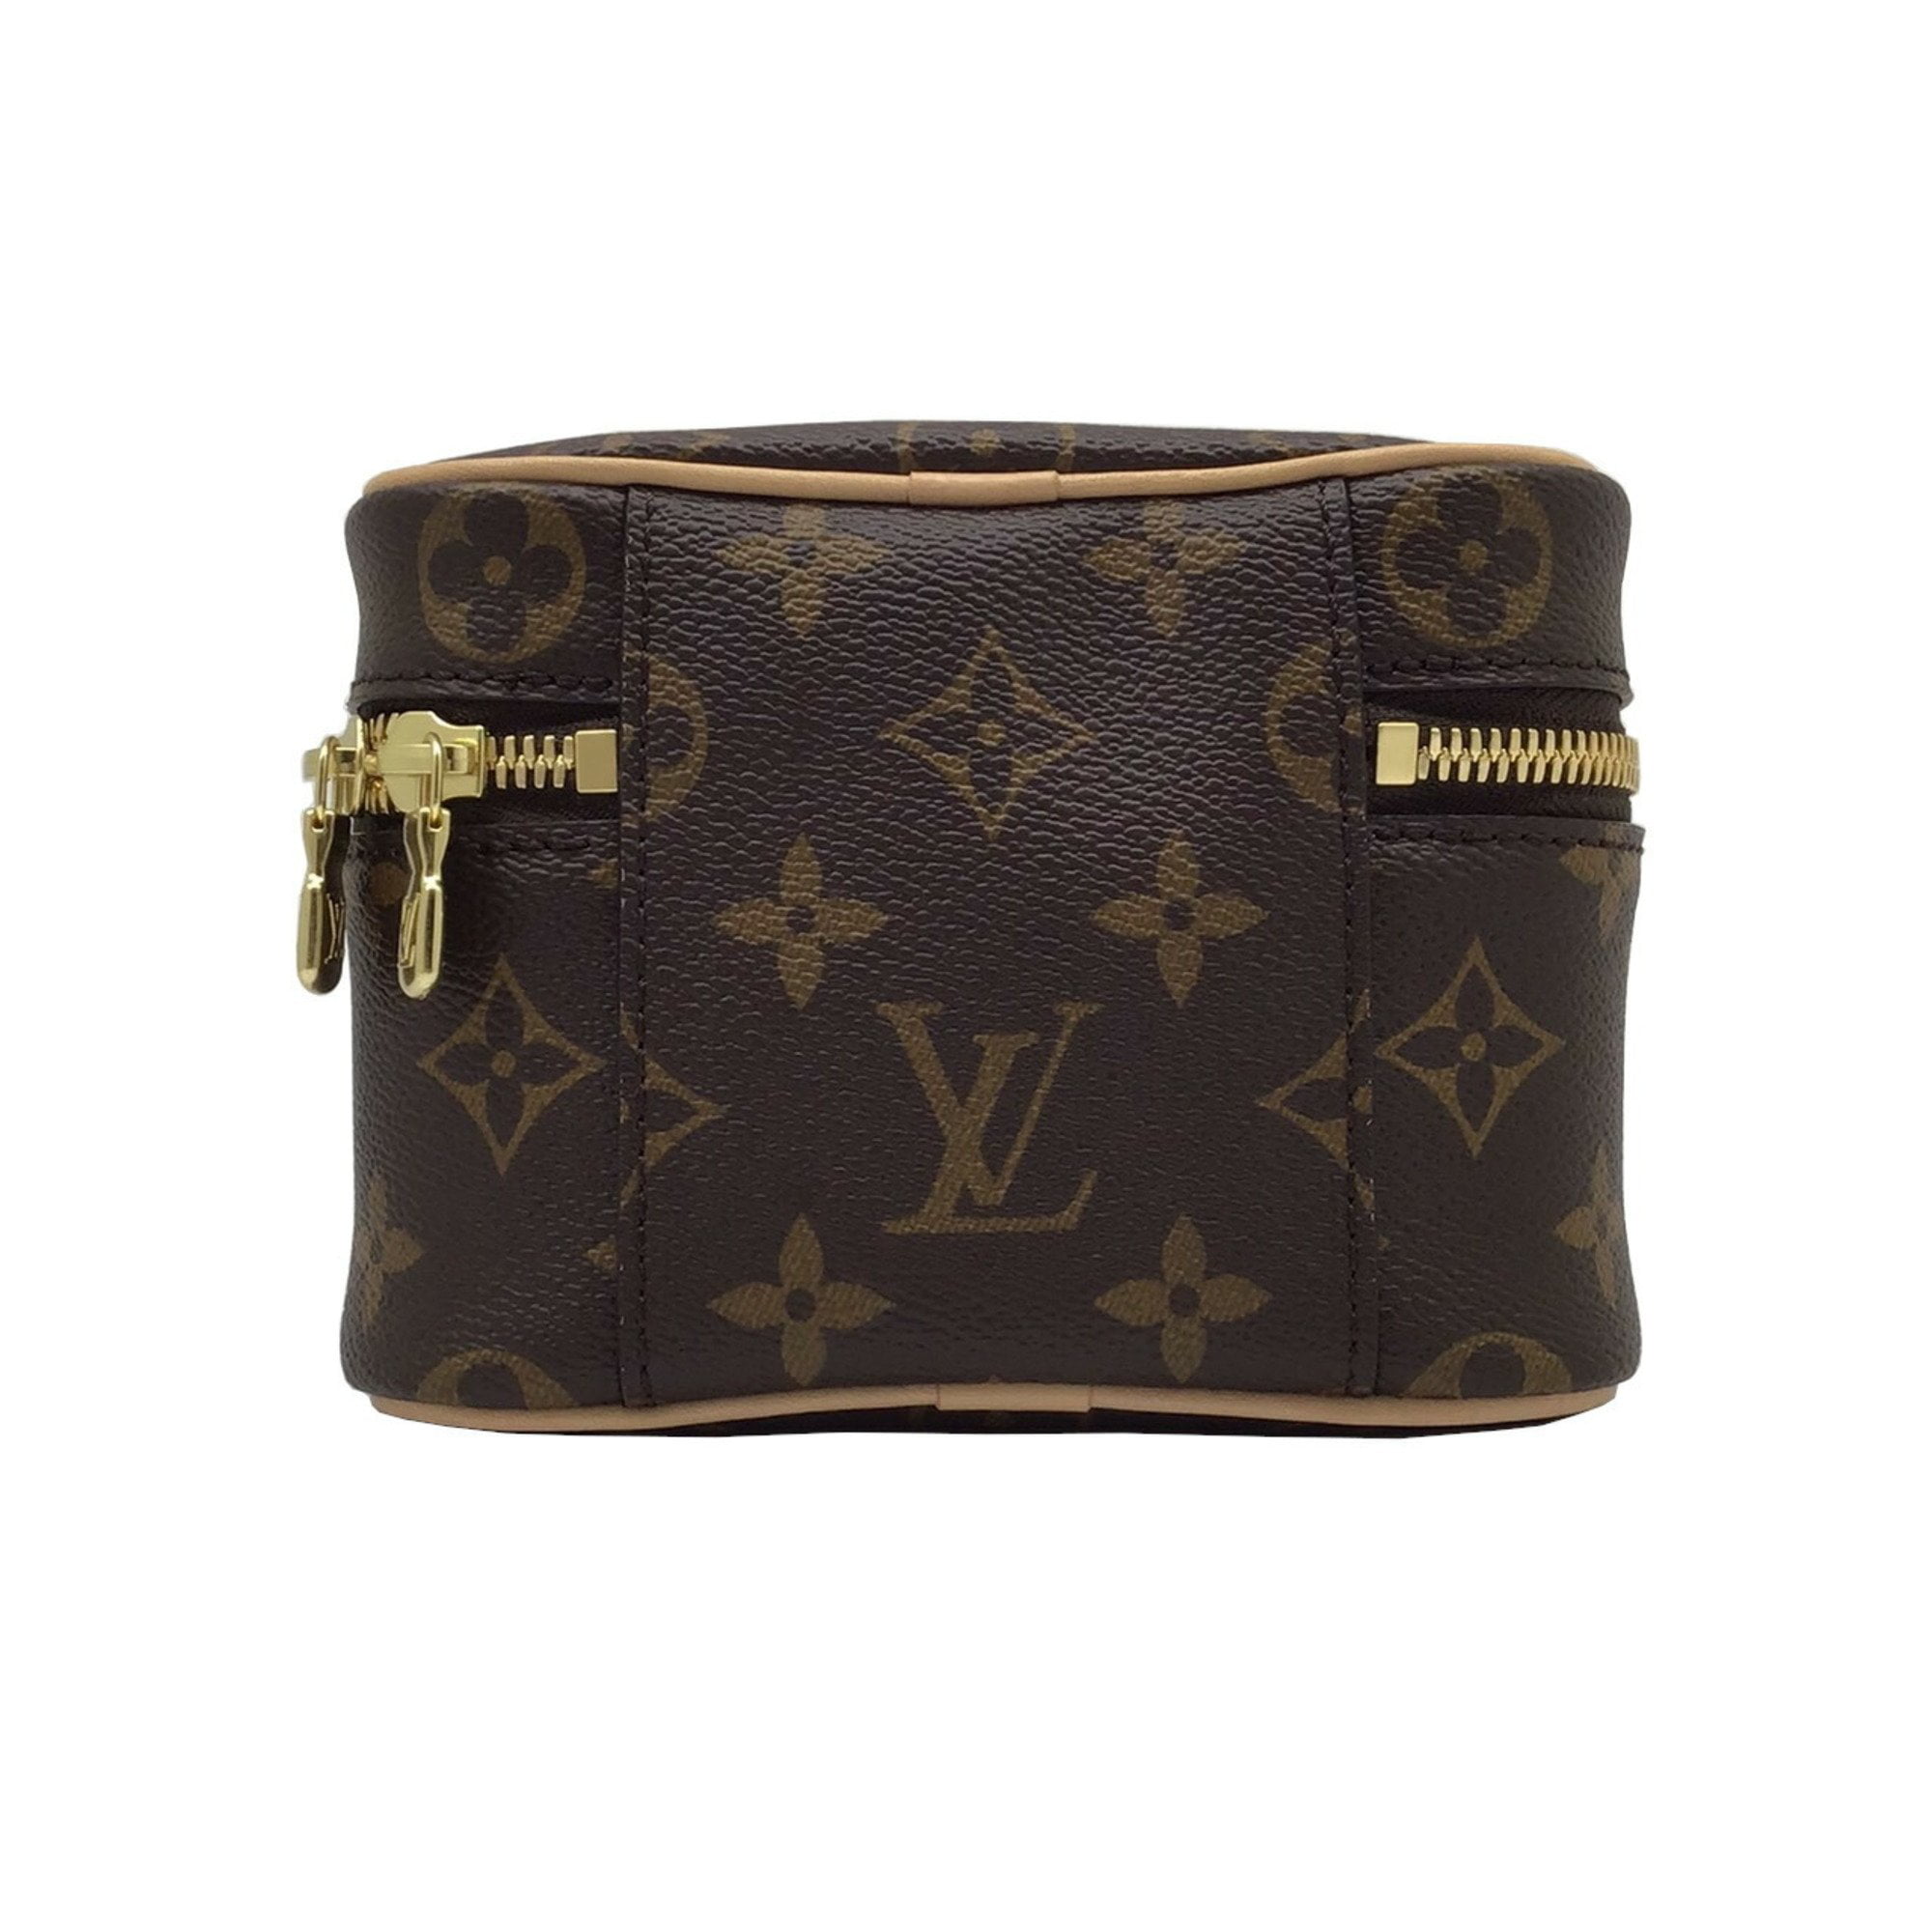 LOUIS VUITTON LOUIS VUITTON Nice Jewelry Case Accessory Pouch M43449  Monogram Used Unisex LV M43449｜Product Code：2101217363617｜BRAND OFF Online  Store